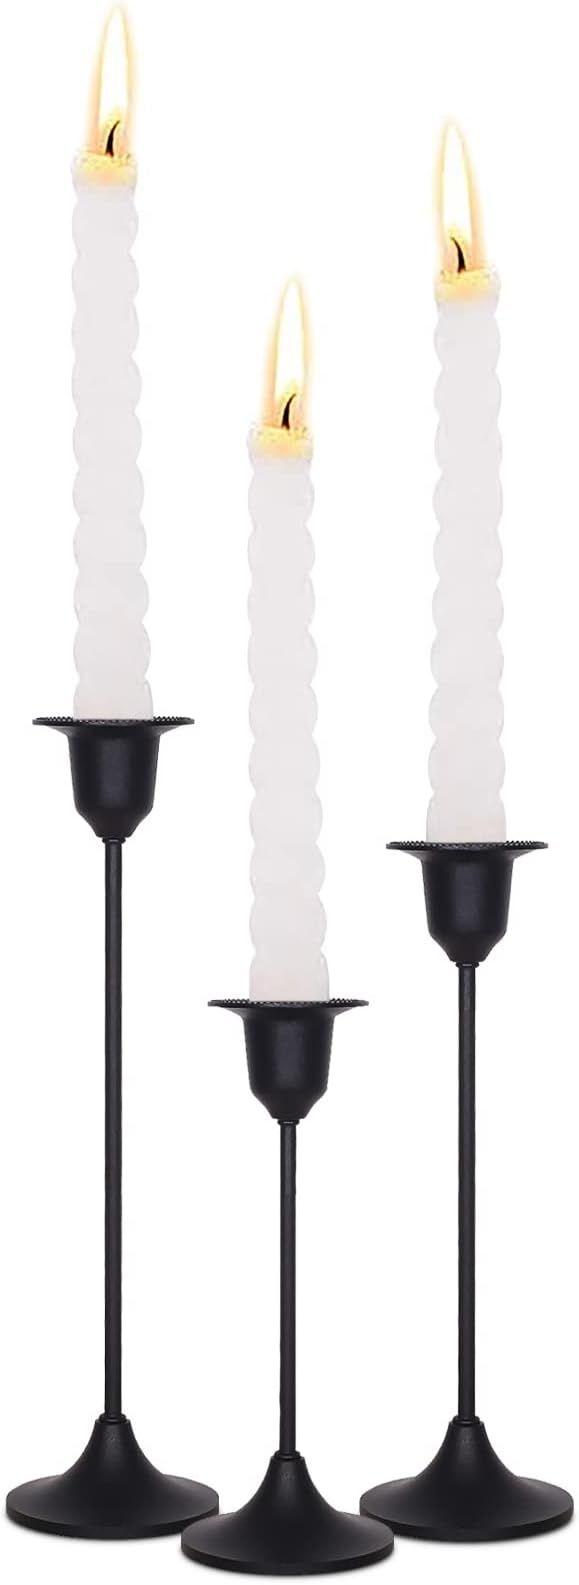 Amazon.com: Black Candlestick Holders - Set of 3 Taper Candle Holders Vintage Candlelight Dinner ... | Amazon (US)